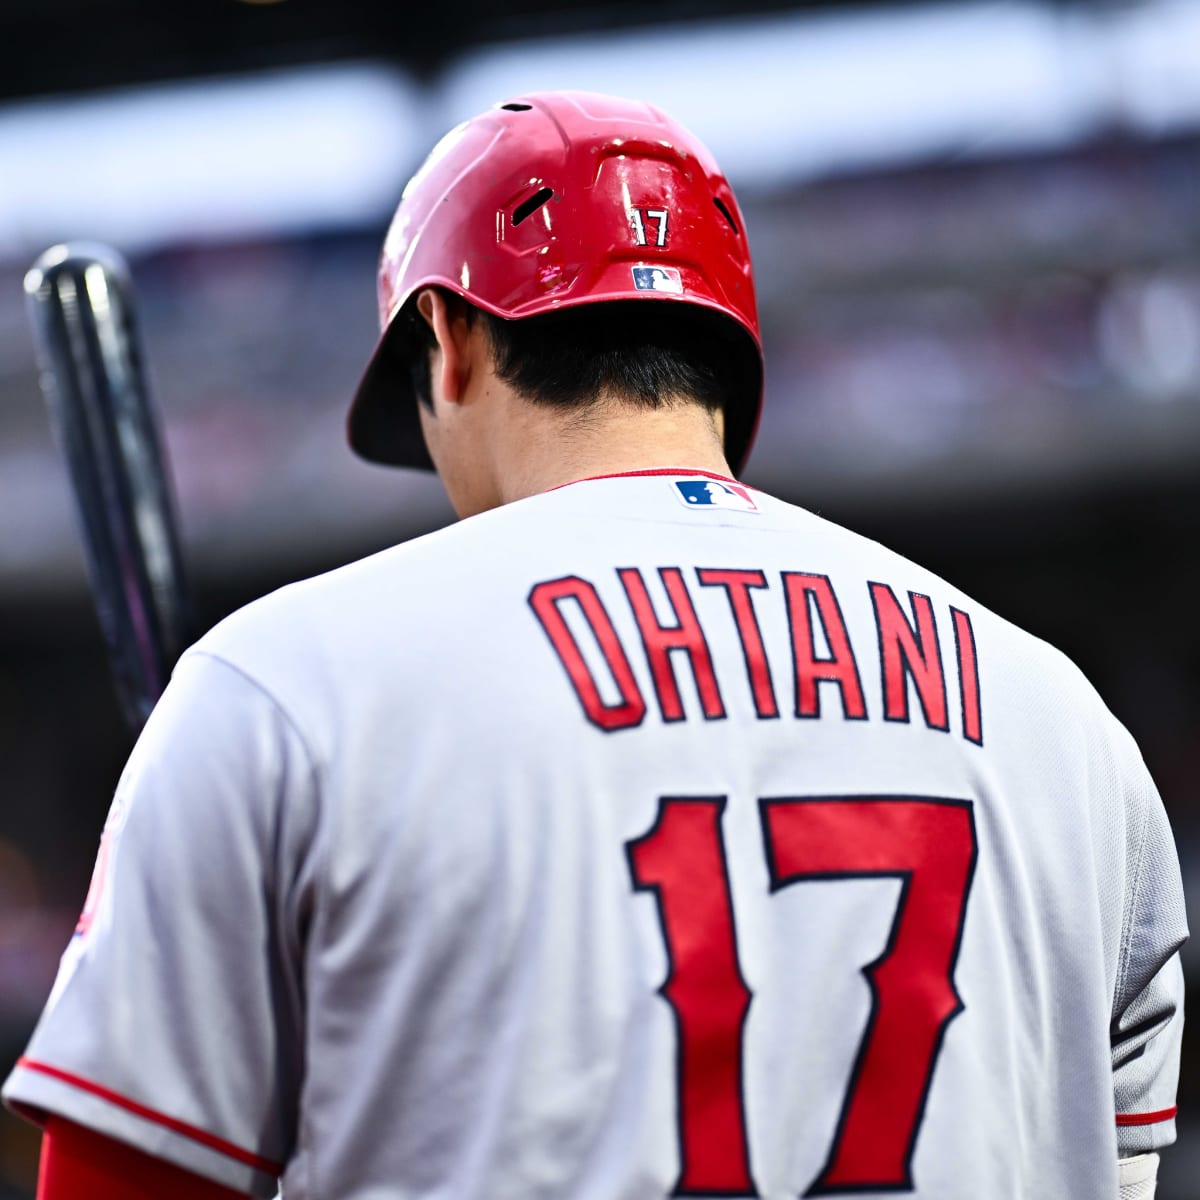 Shohei Ohtani Emptied His Angels Locker for Possibly Last Time